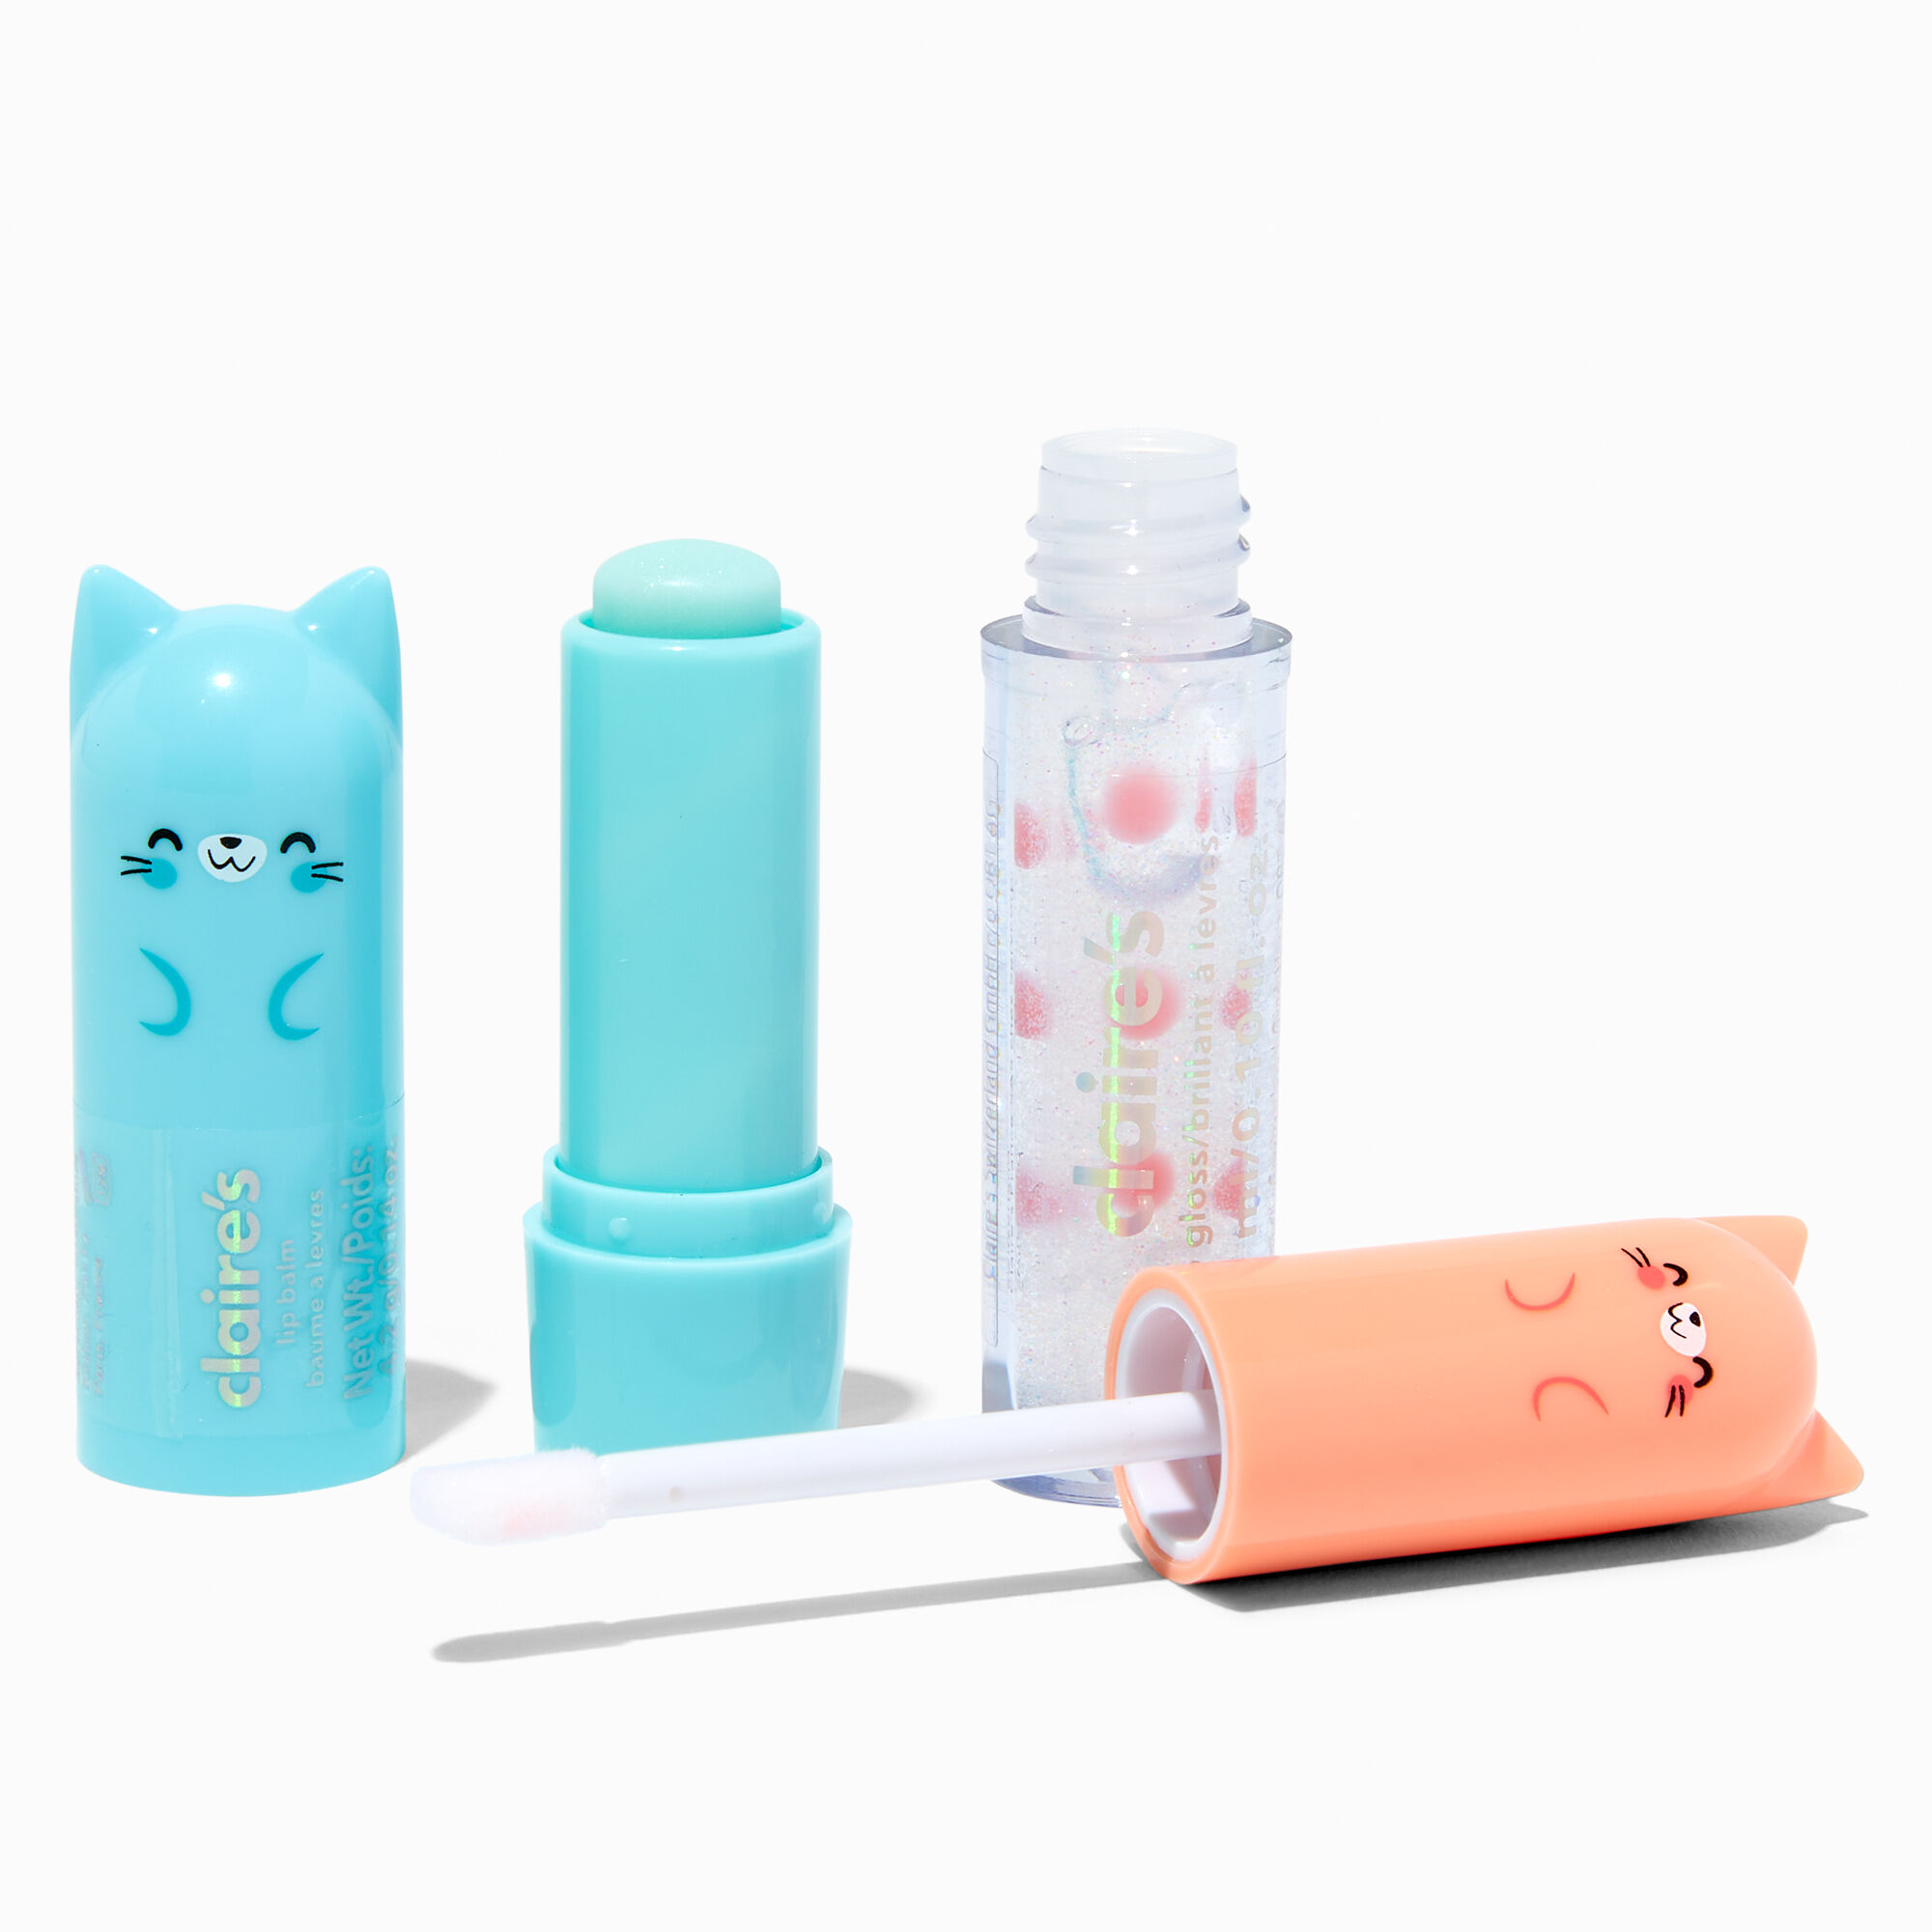 View Claires Cat Lip Gloss Balm Set 2 Pack information